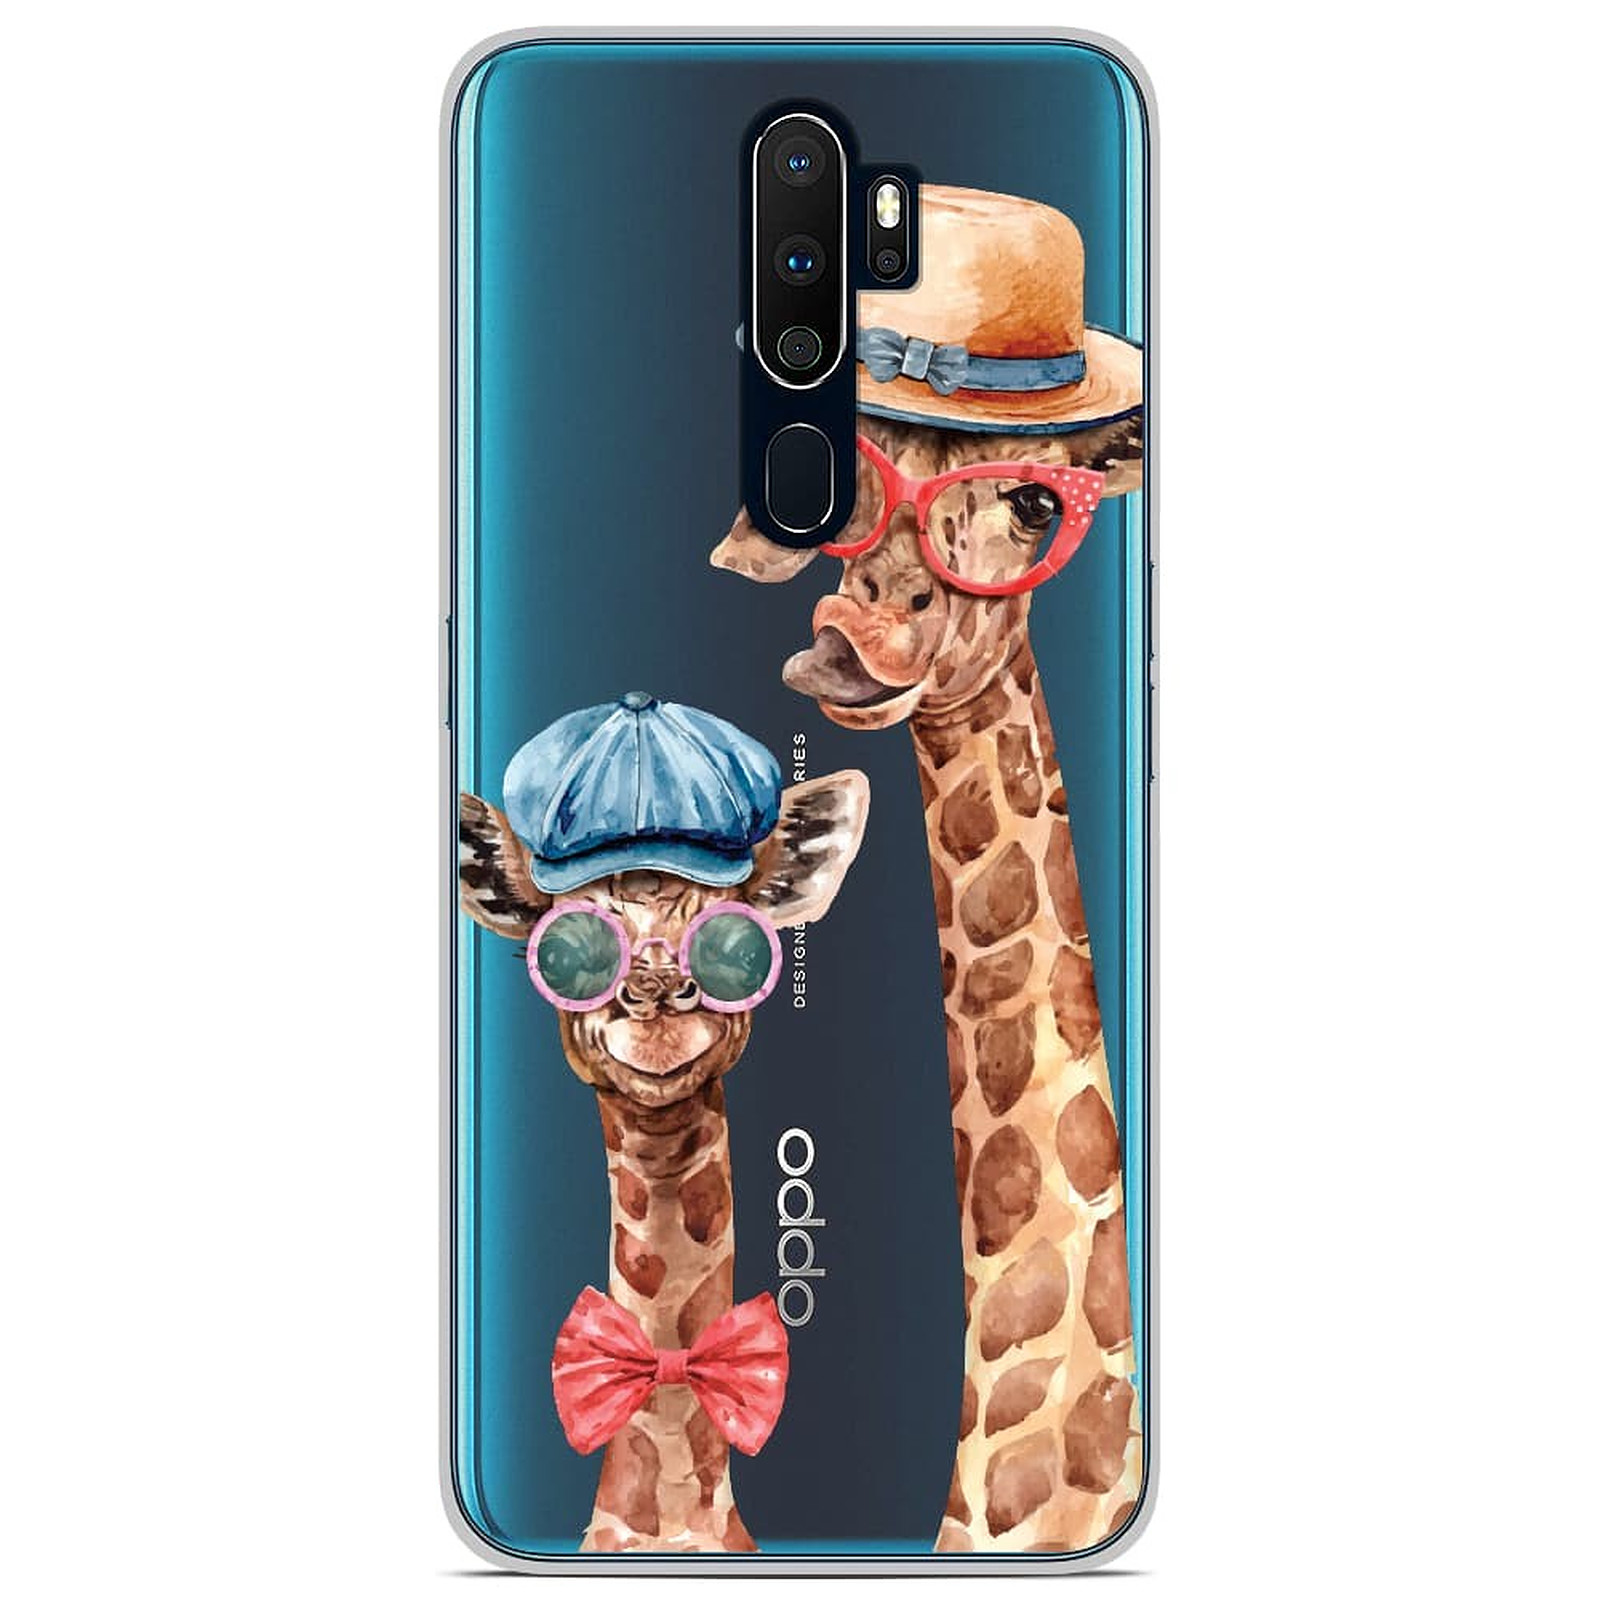 1001 Coques Coque silicone gel Oppo A5 2020 motif Funny Girafe - Coque telephone 1001Coques